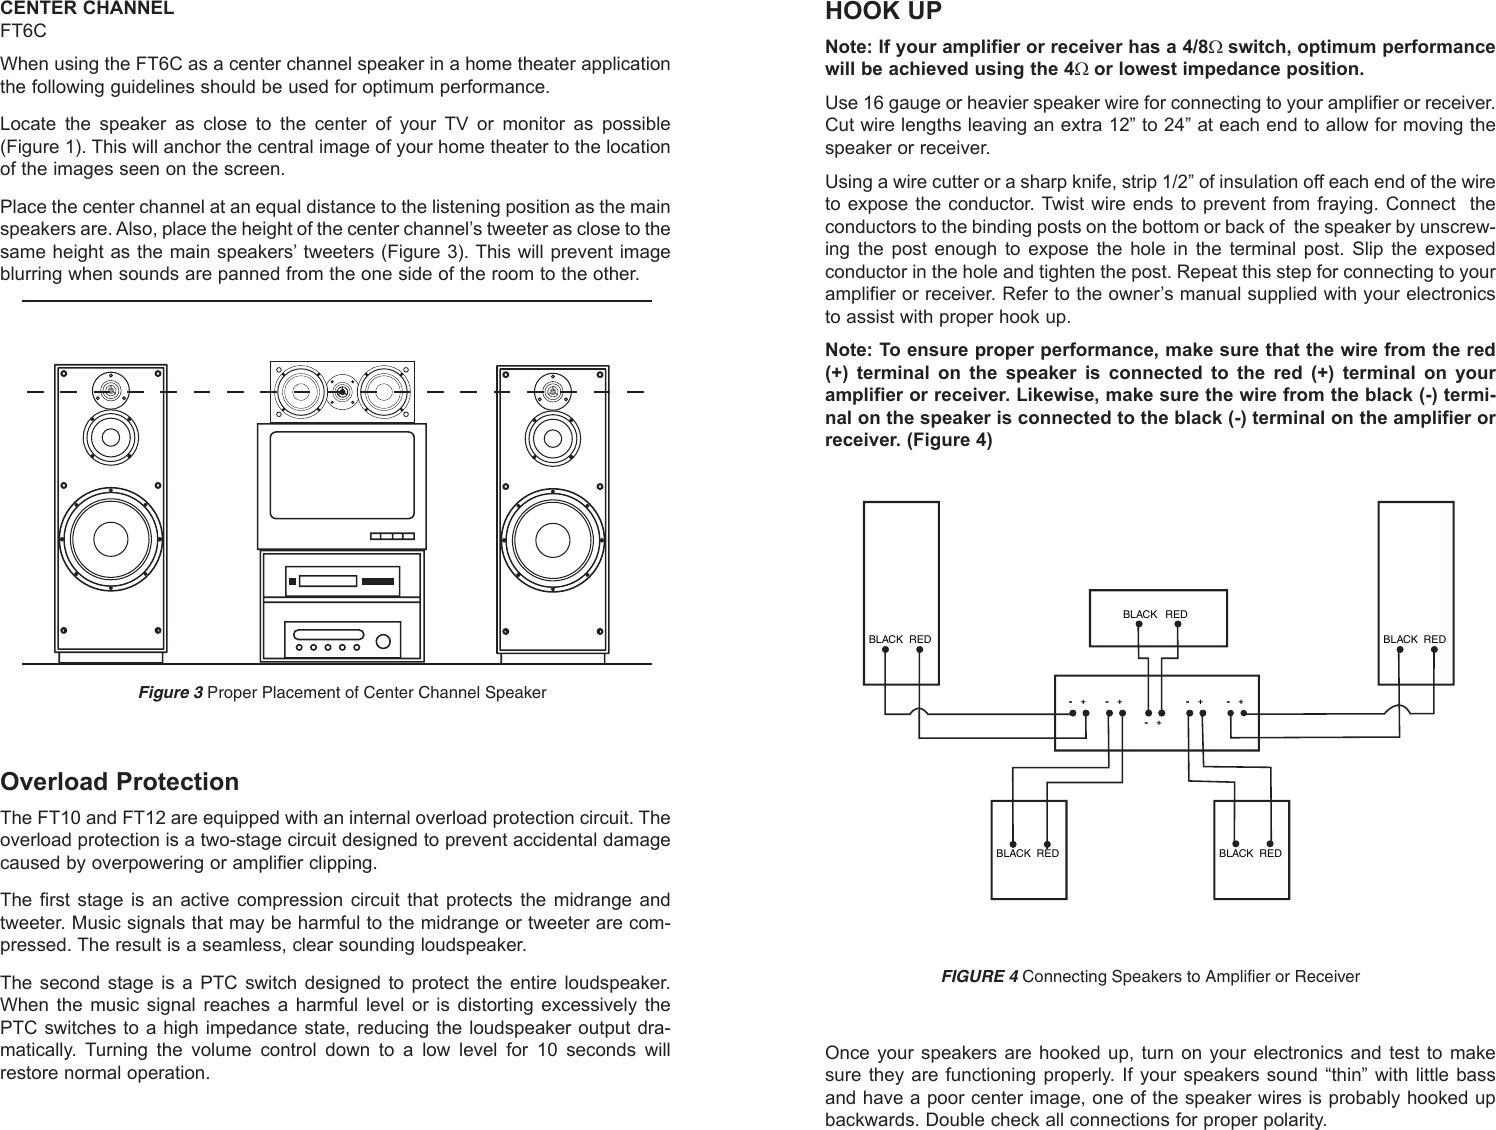 Page 4 of 4 - Dcm-Speakers Dcm-Speakers-Ft10-Users-Manual- FT12, 10, 6, AND 6C Owners Manual (21A6479)  Dcm-speakers-ft10-users-manual